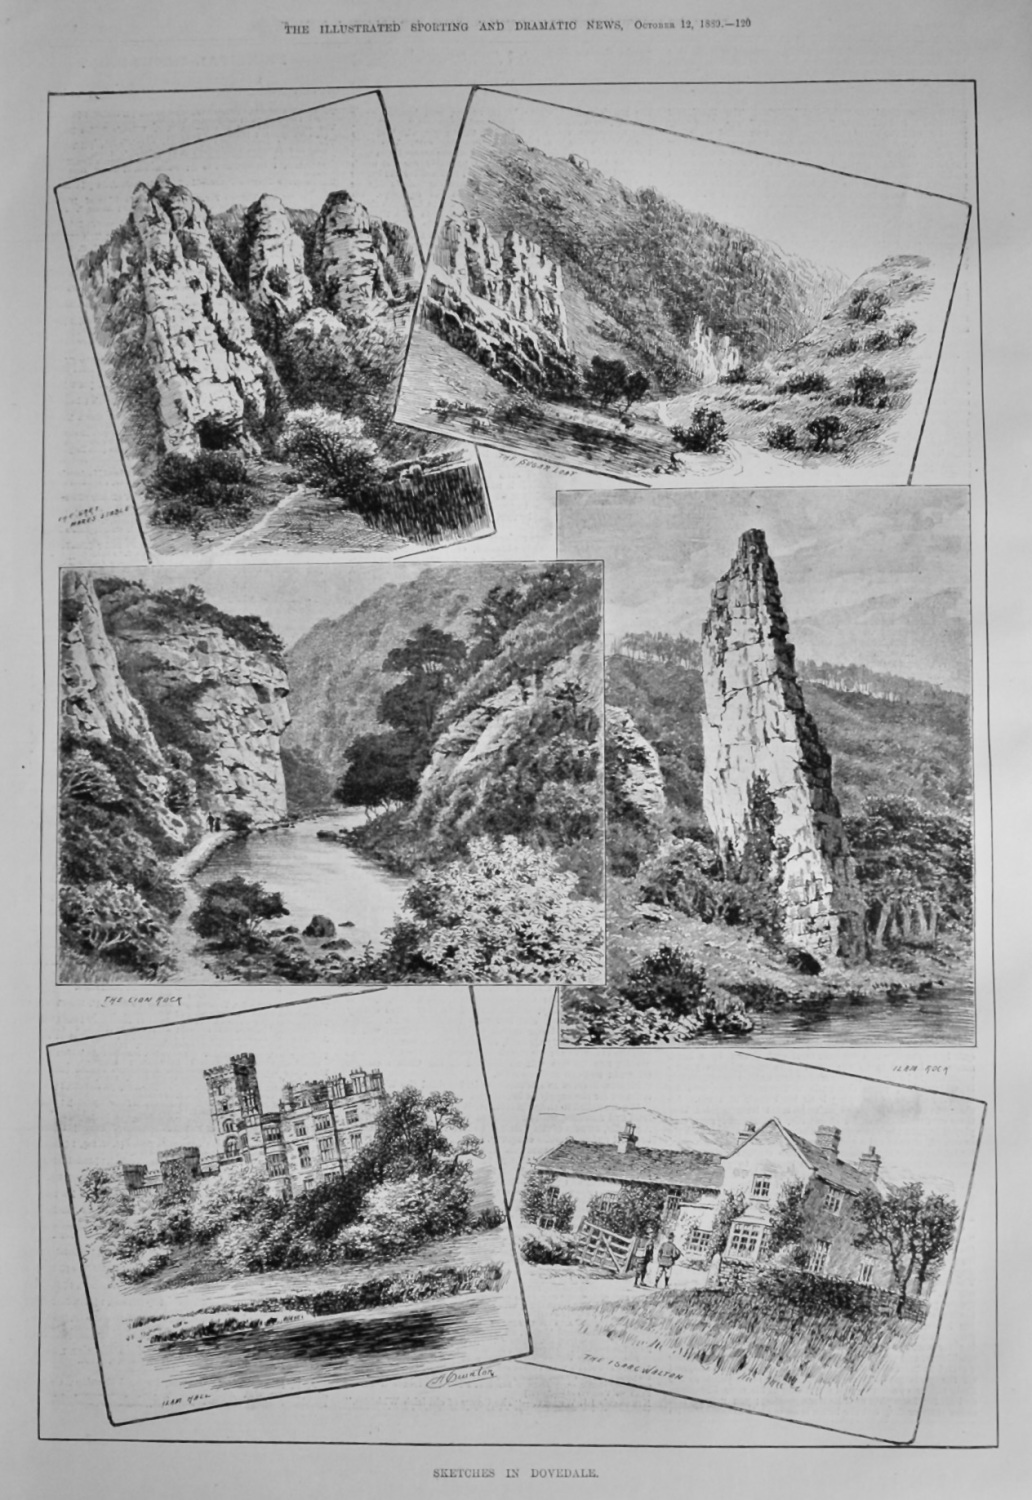 Sketches in Dovedale.  1889.